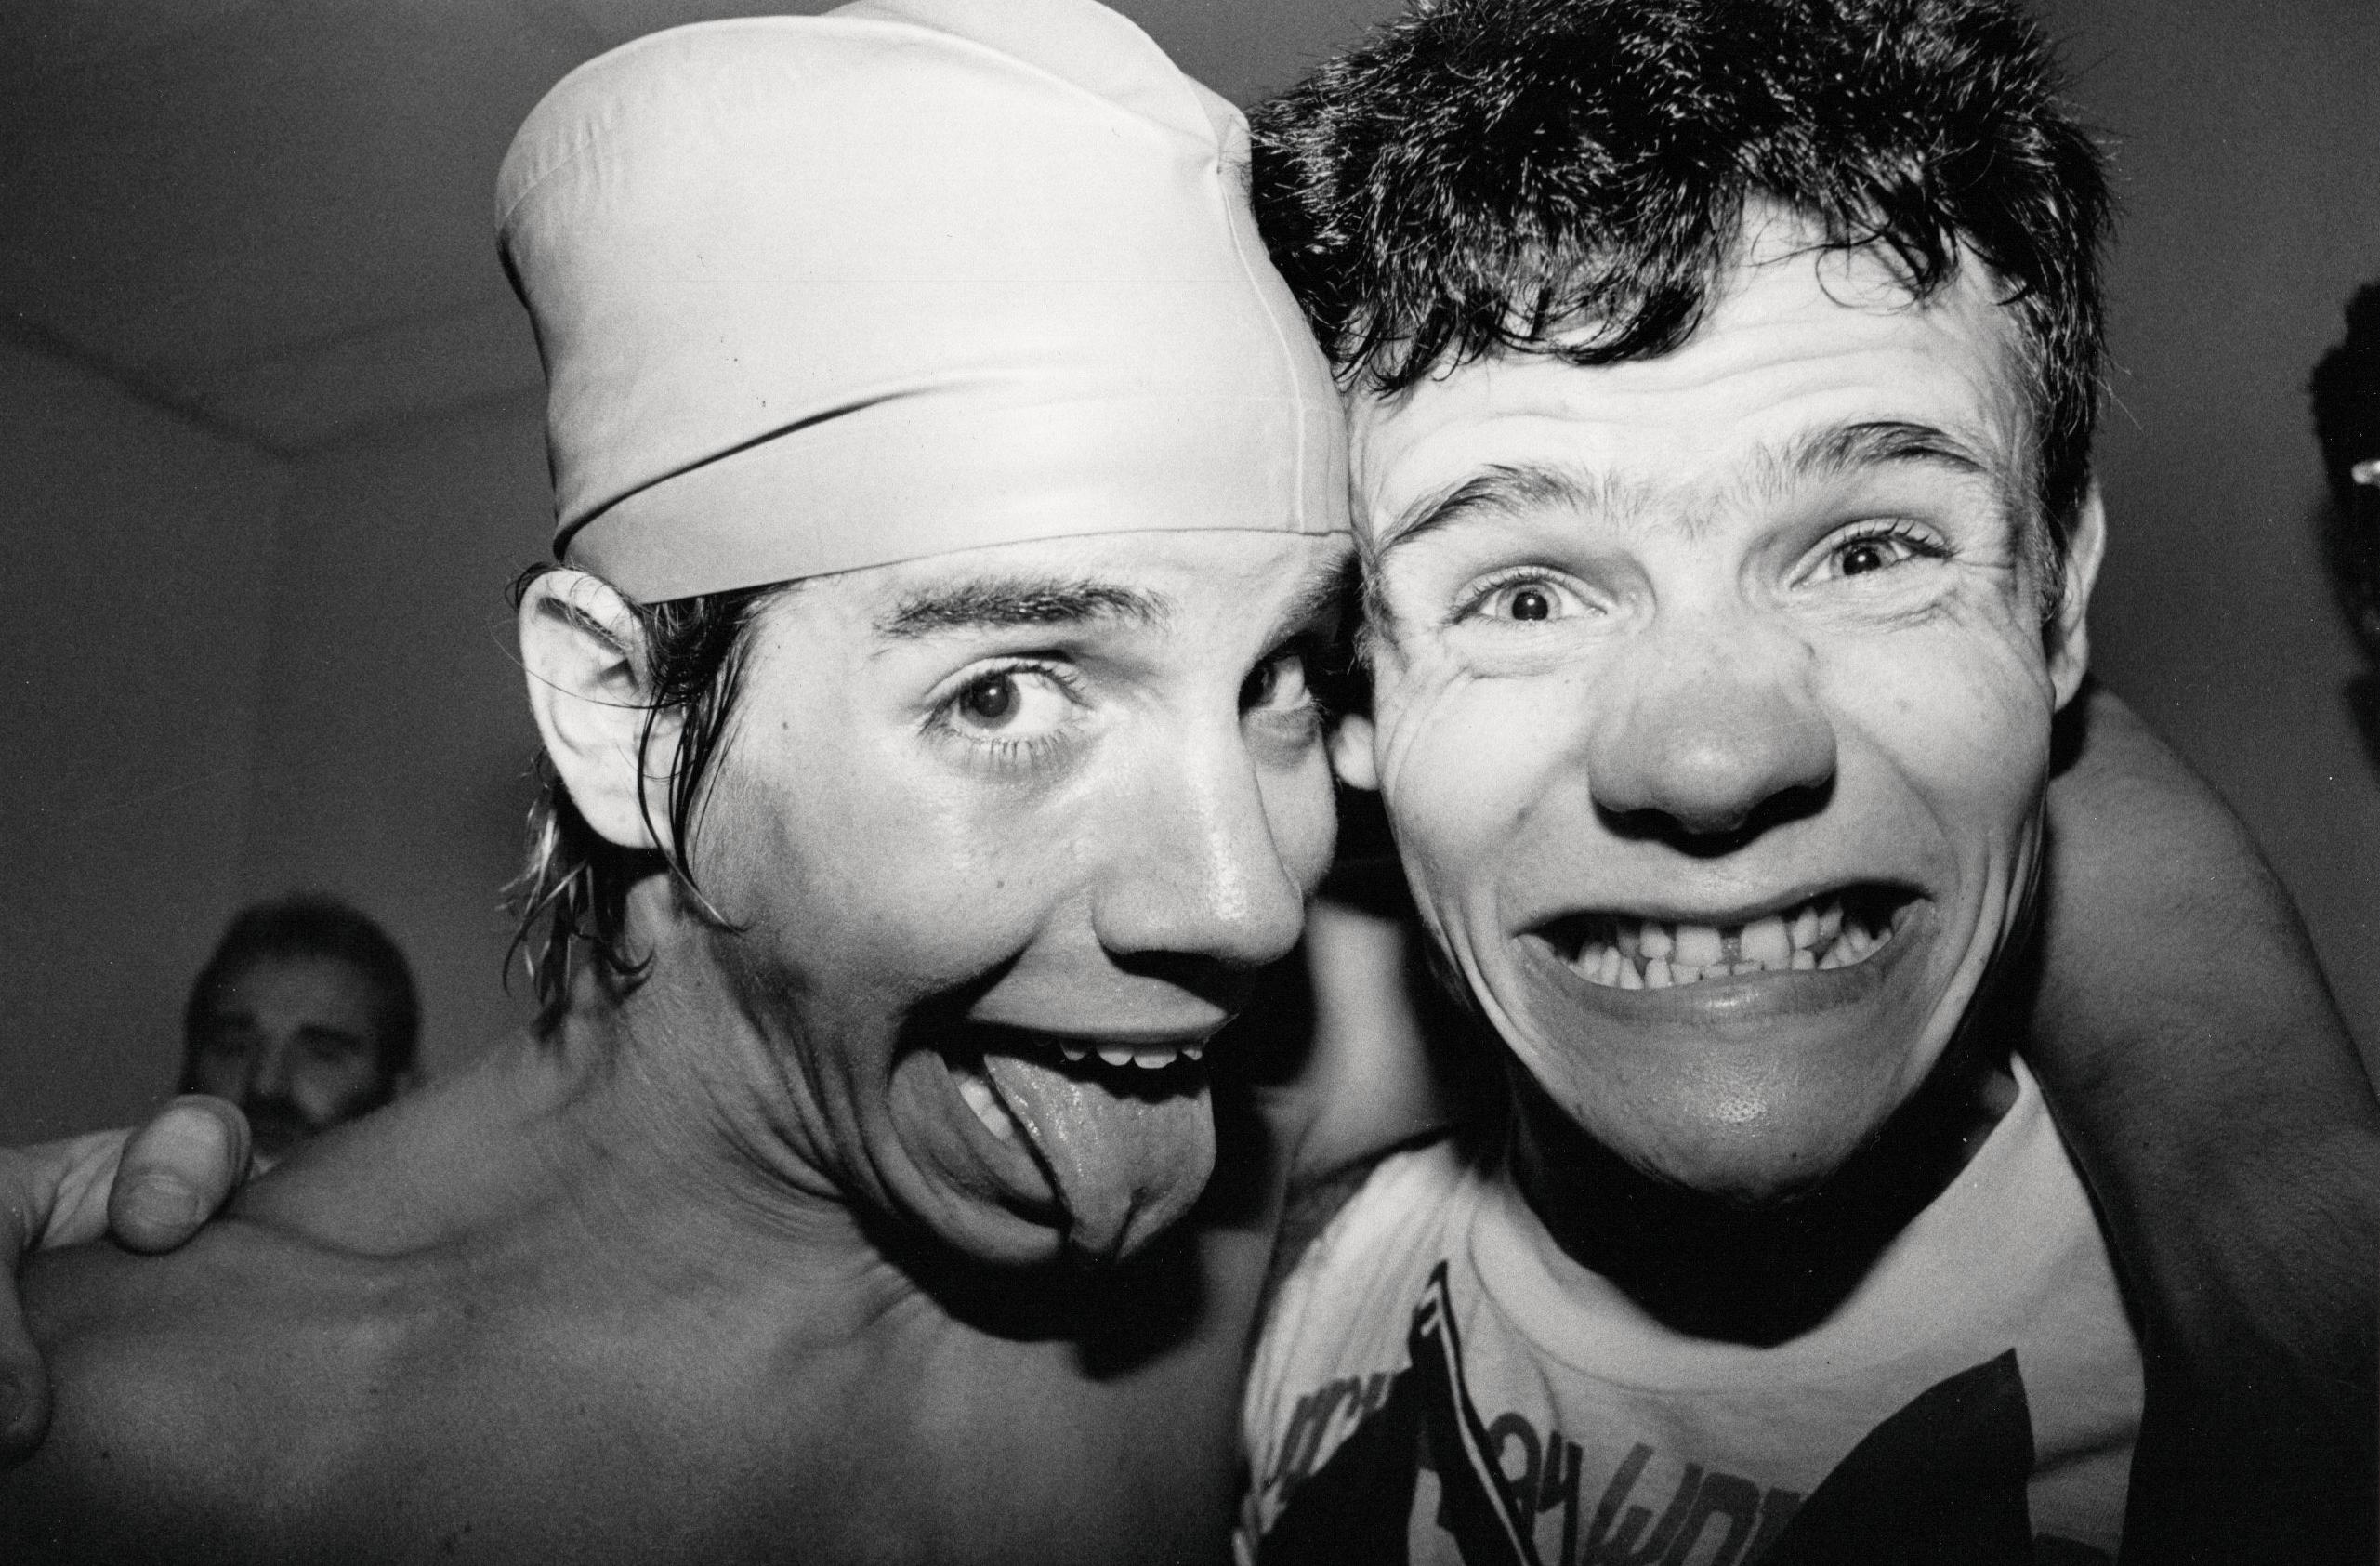 Gary Gershoff Black and White Photograph - Anthony Kiedis and Flea of Red Hot Chili Peppers Vintage Original Photograph